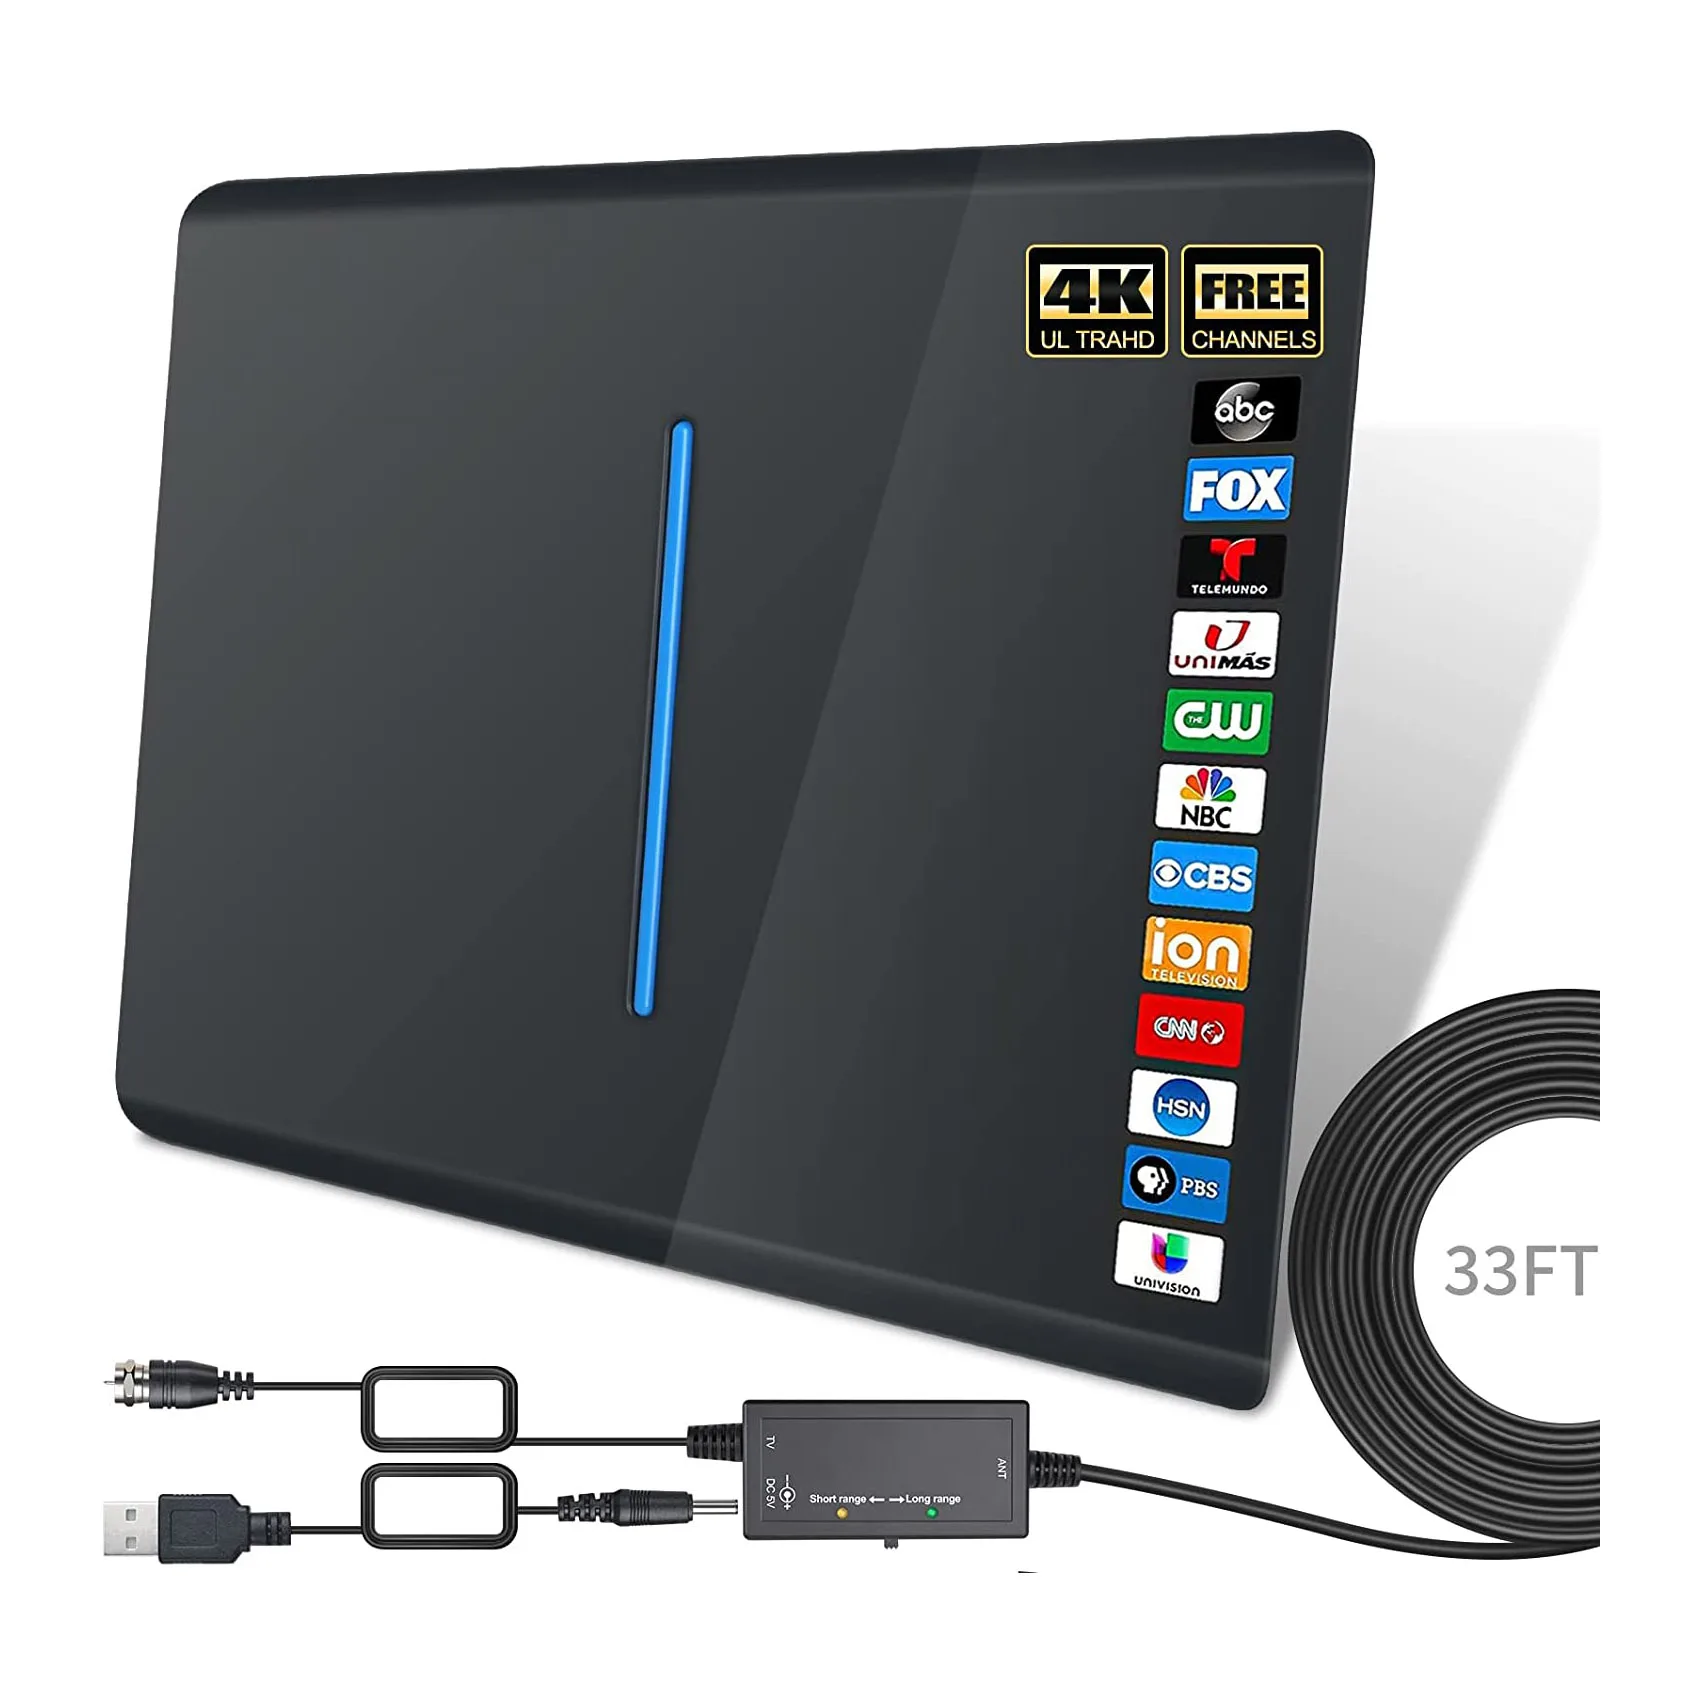 2019 New Indoor Amplified Digital TV Antenna 120 Miles Range with Amplifier Signal Booster Free Local Channels with 18 FT Coaxial Cable HDTV Antenna 4K 1080p 